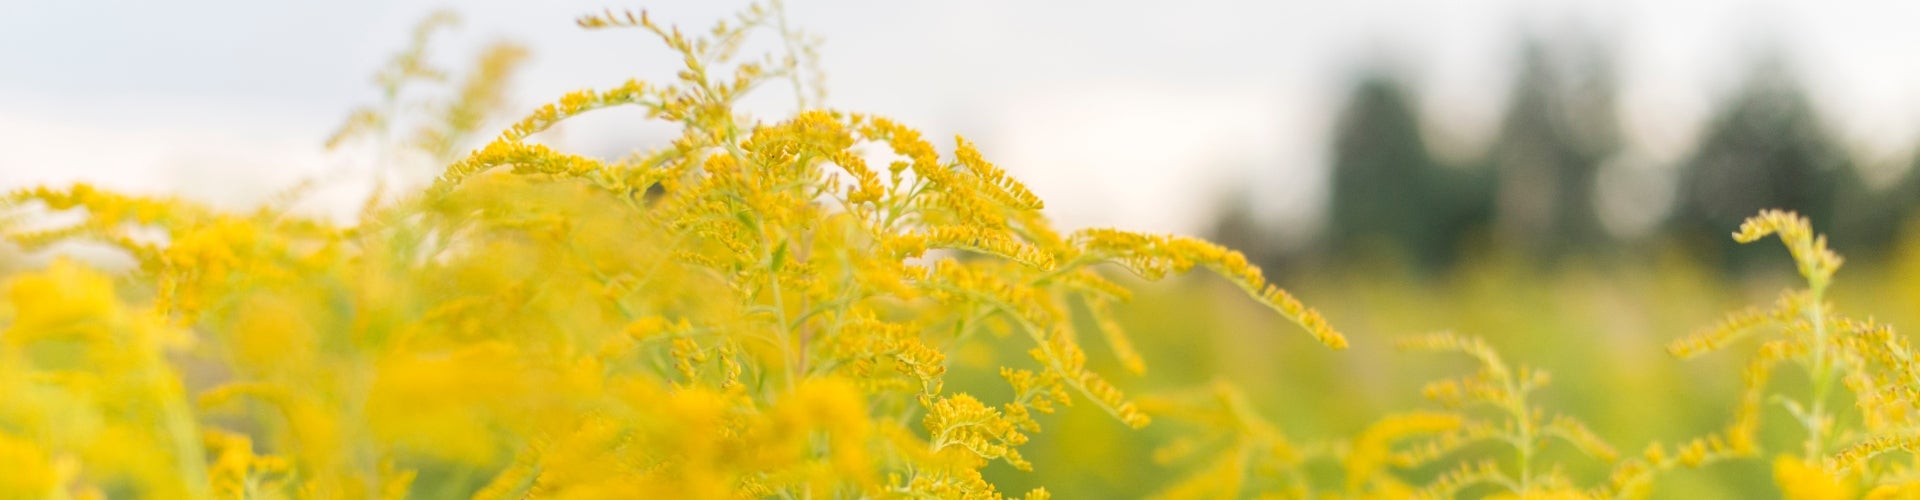 Goldenrod with green stems and small, yellow dropping flowers. 